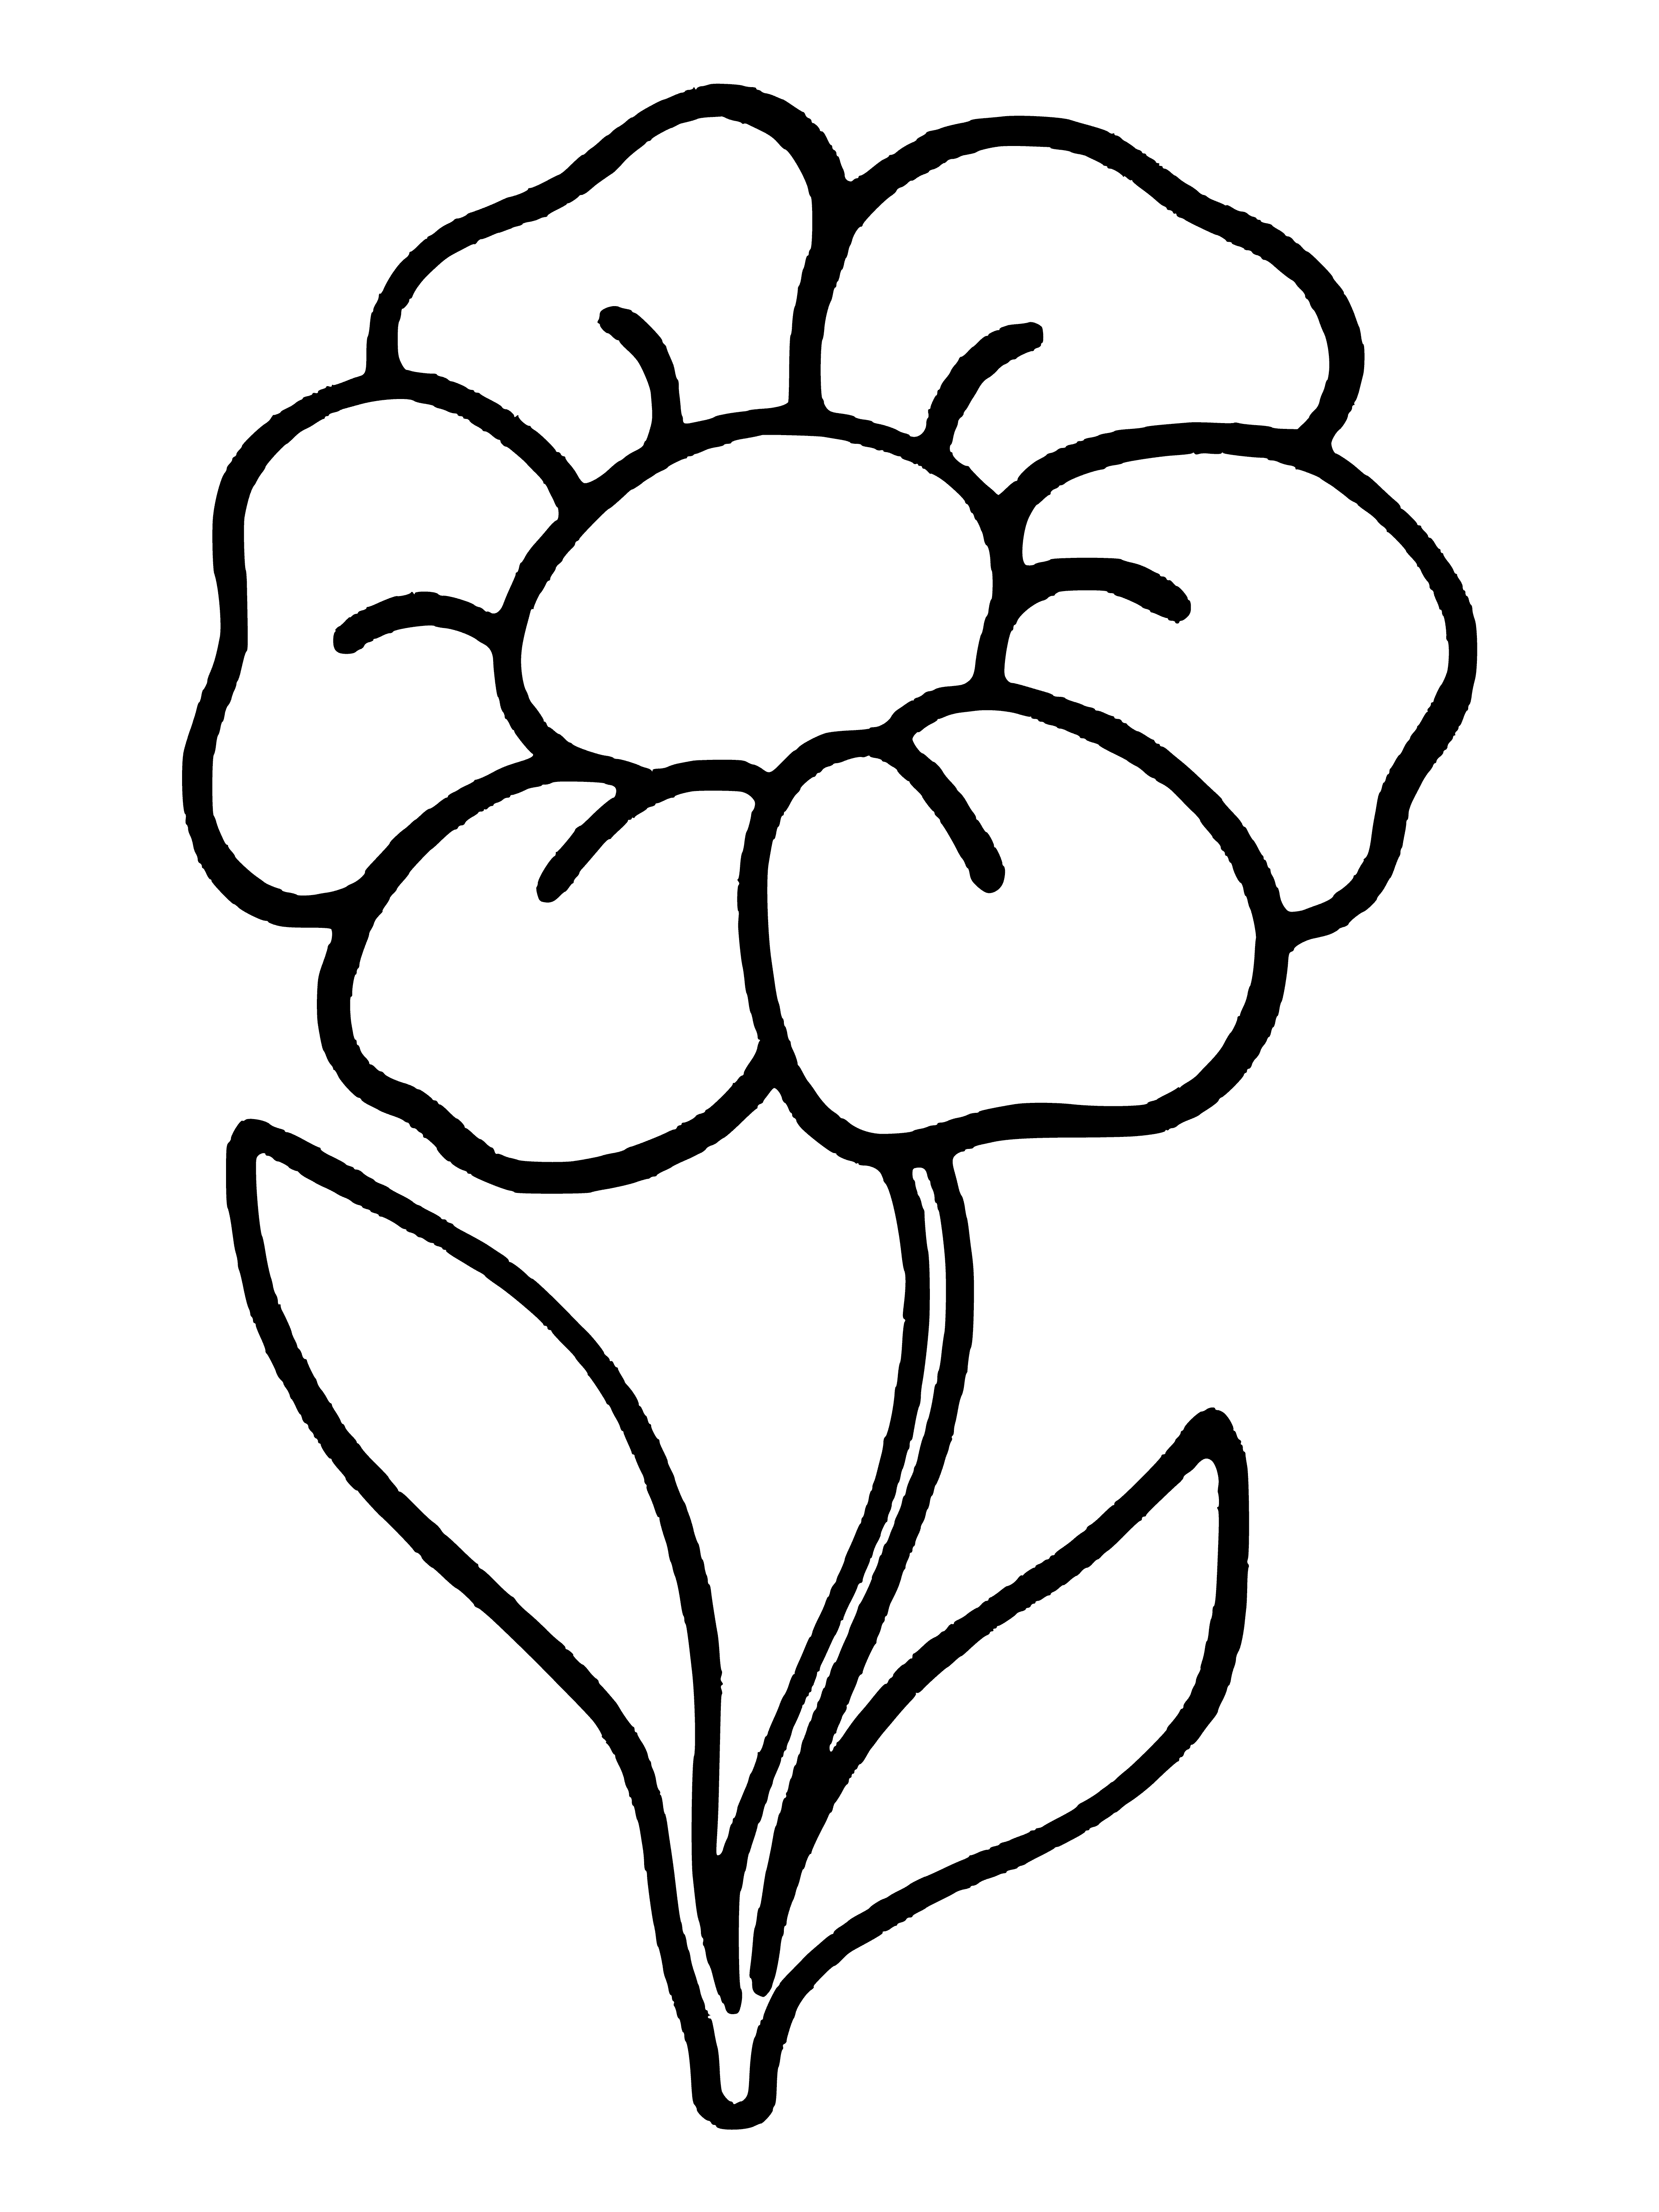 coloring page: A large yellow flower w/six petals in a spiral, pink & yellow center, & two background leaves partially obscured.